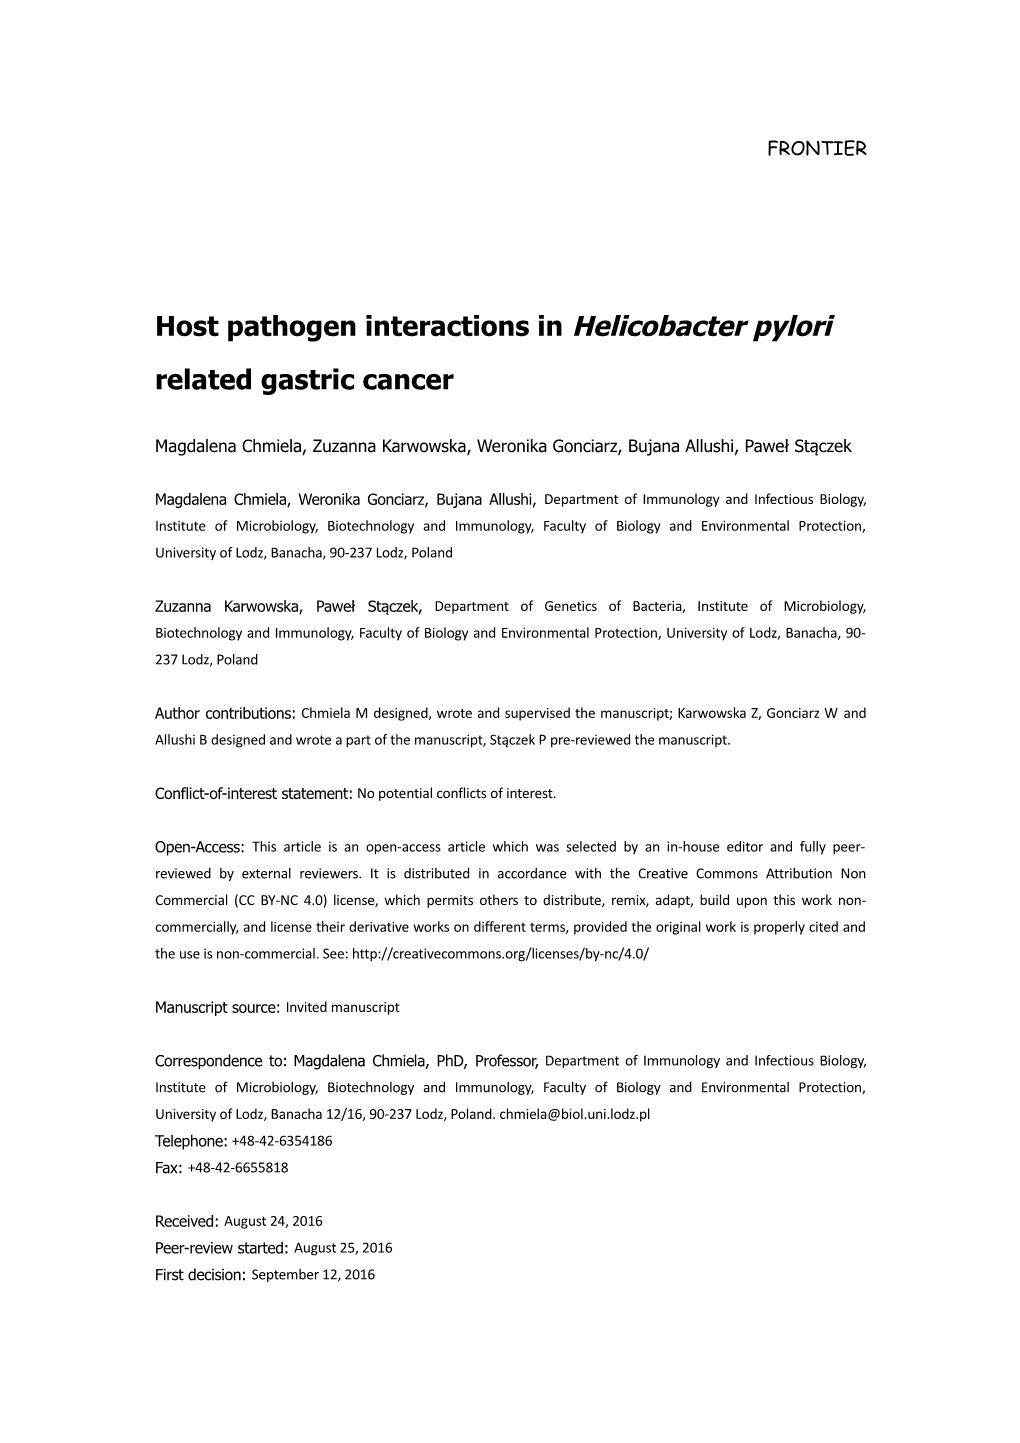 Host Pathogen Interactions in Helicobacter Pylori Related Gastric Cancer